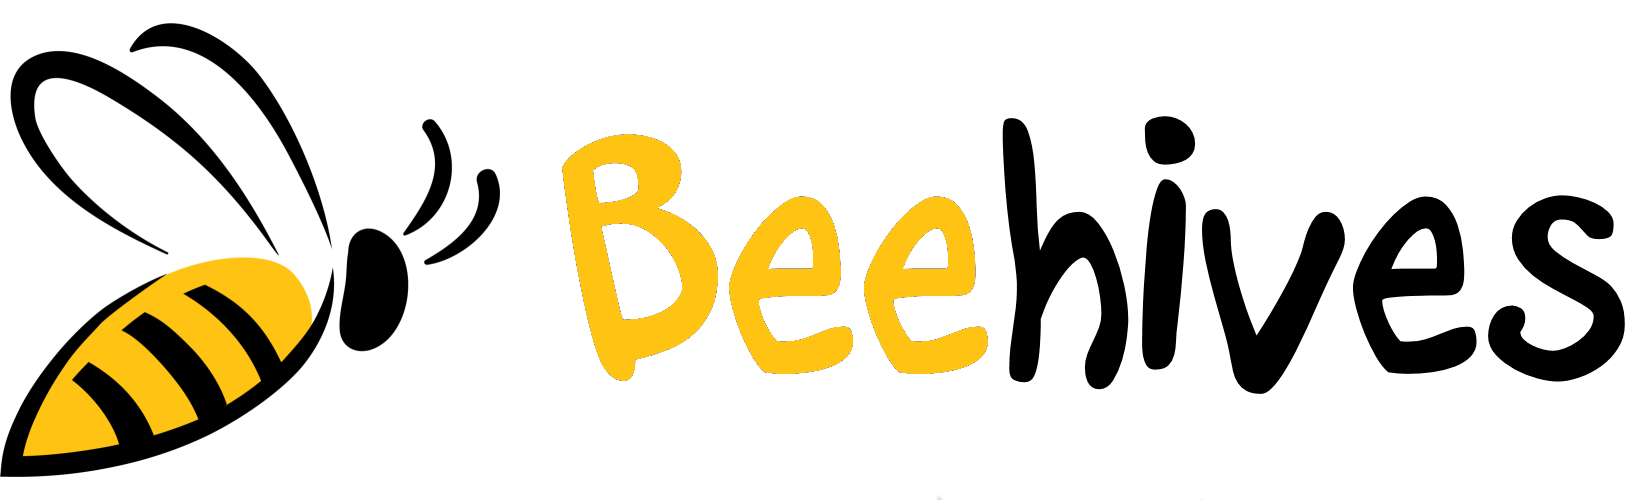 Beehives for Africa